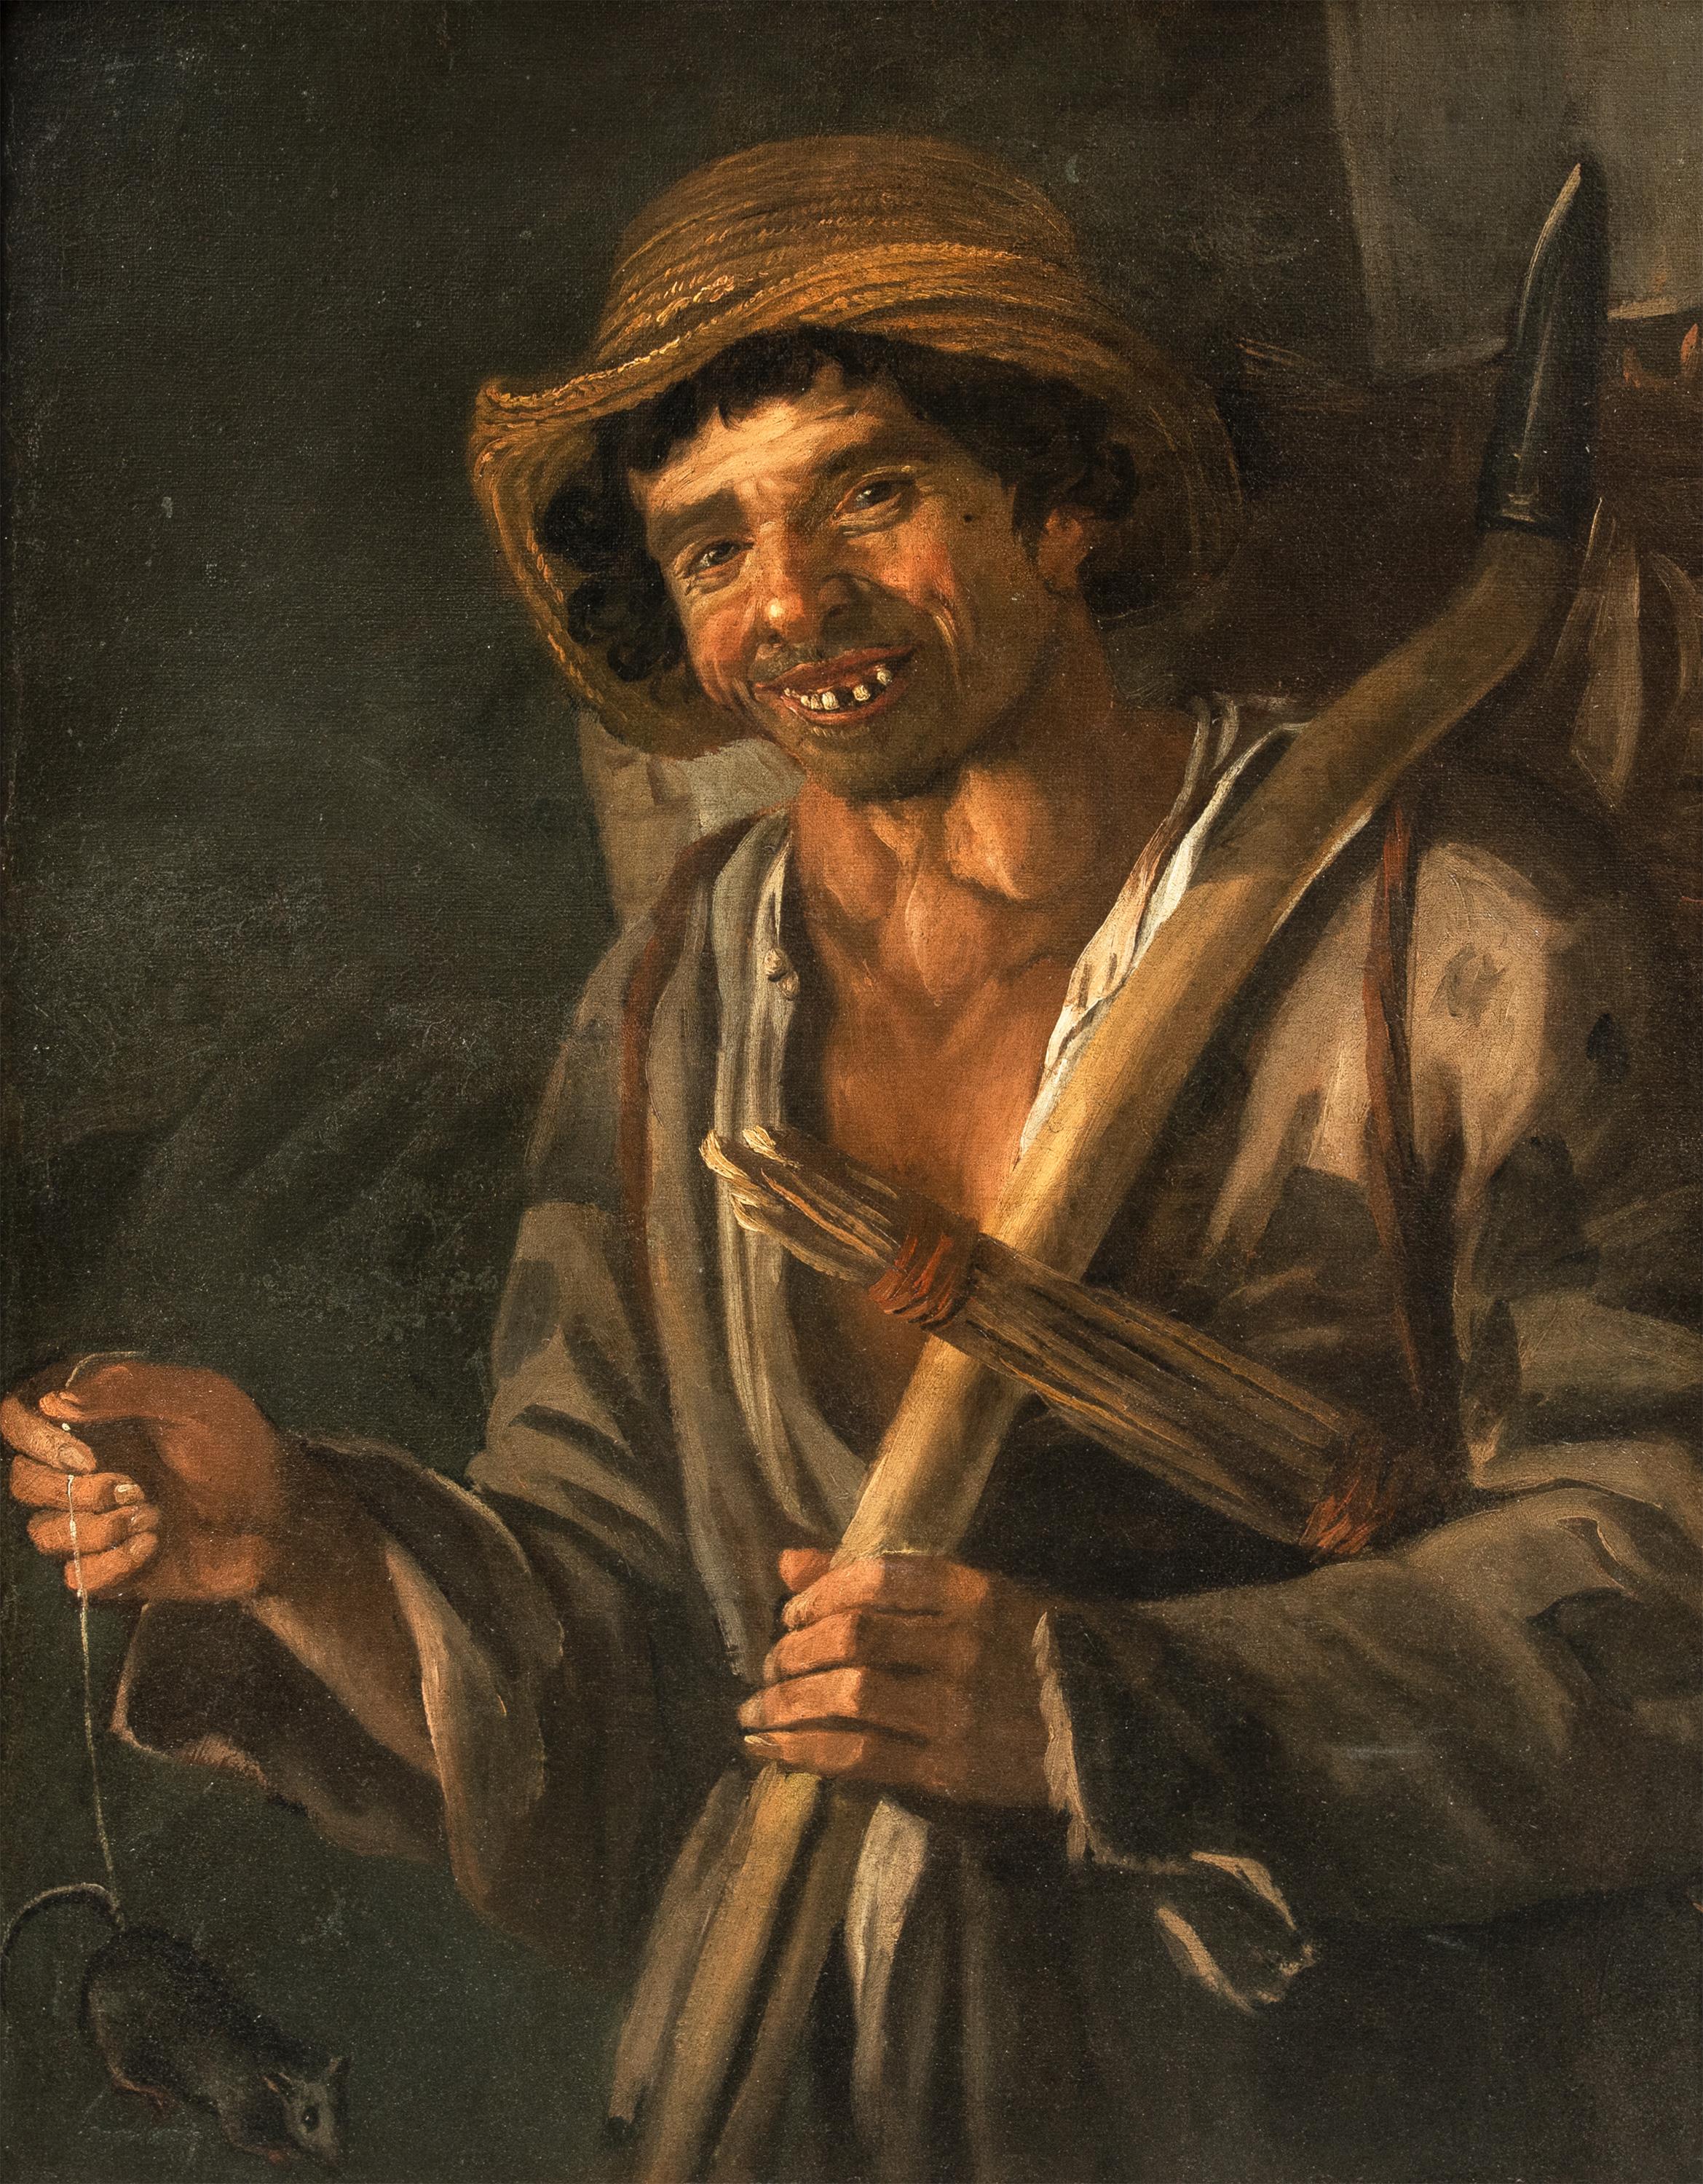 Antonio Cifrondi (Clusone 1656 - Brescia 1730) - Farmer with mouse.

87 x 69 cm without frame, 109.5 x 92.5 cm with frame.

Antique oil painting on canvas, in a carved wooden frame.

Provenance: Private collection, Pordenone (Italy).

Condition